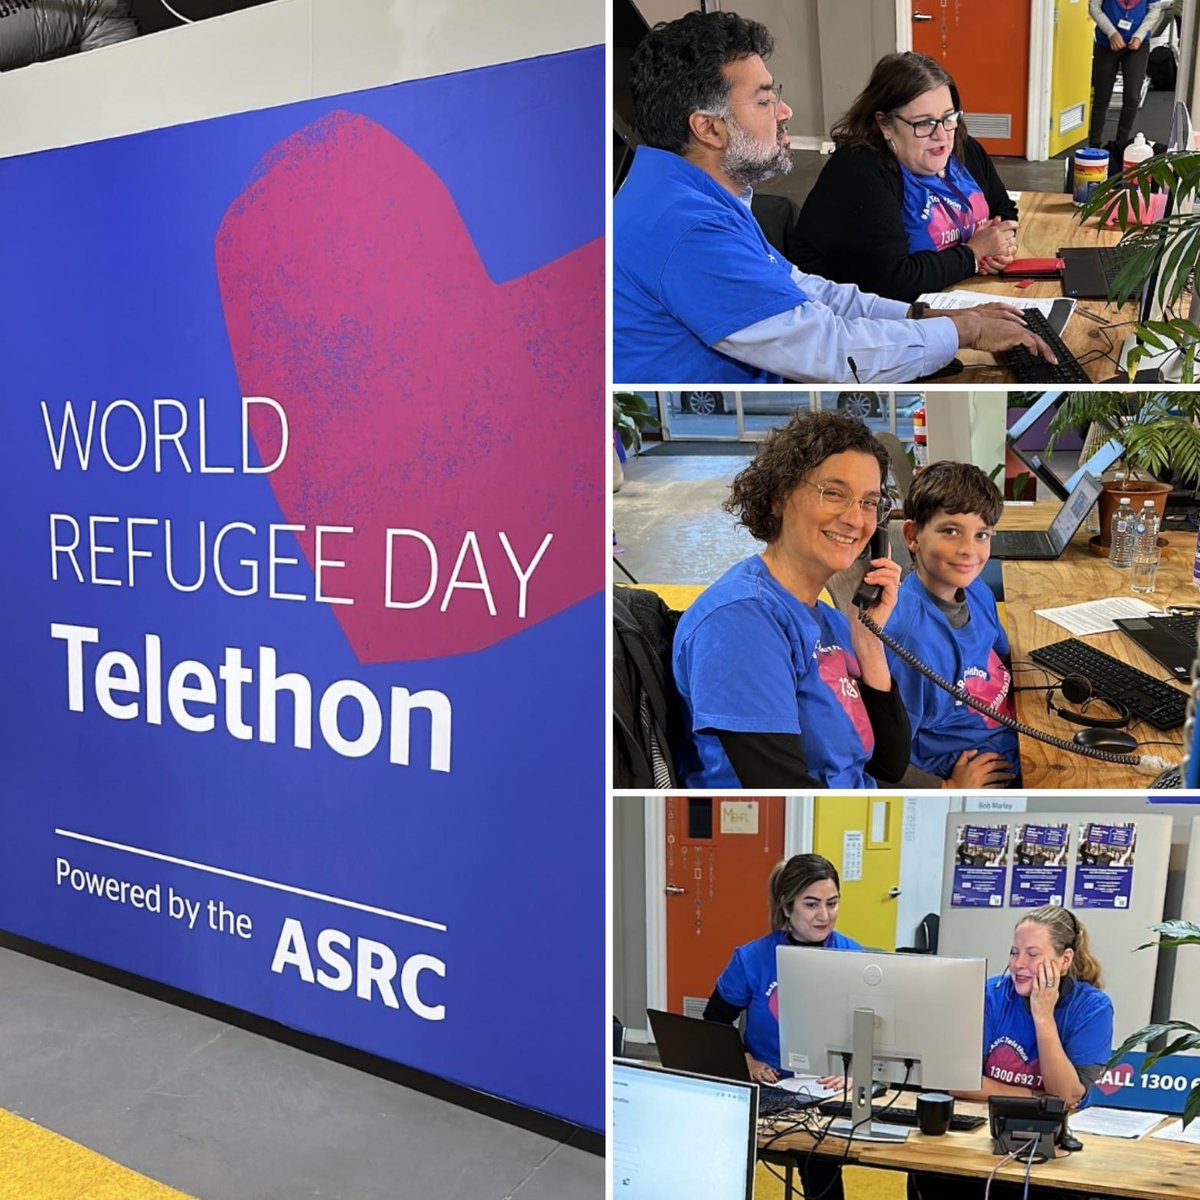 We're a proud supporter of the @ASRC1 World Refugee Day Telethon and matched donations between 5 - 6pm.  

There's still time to donate this evening!

💜 Call 1300 692 772
💜 Visit ASRC.org.au/telethon
💜 Text HOPE to 0476 000 111 to donate $15

#asrctelethon #RefugeesWelcome